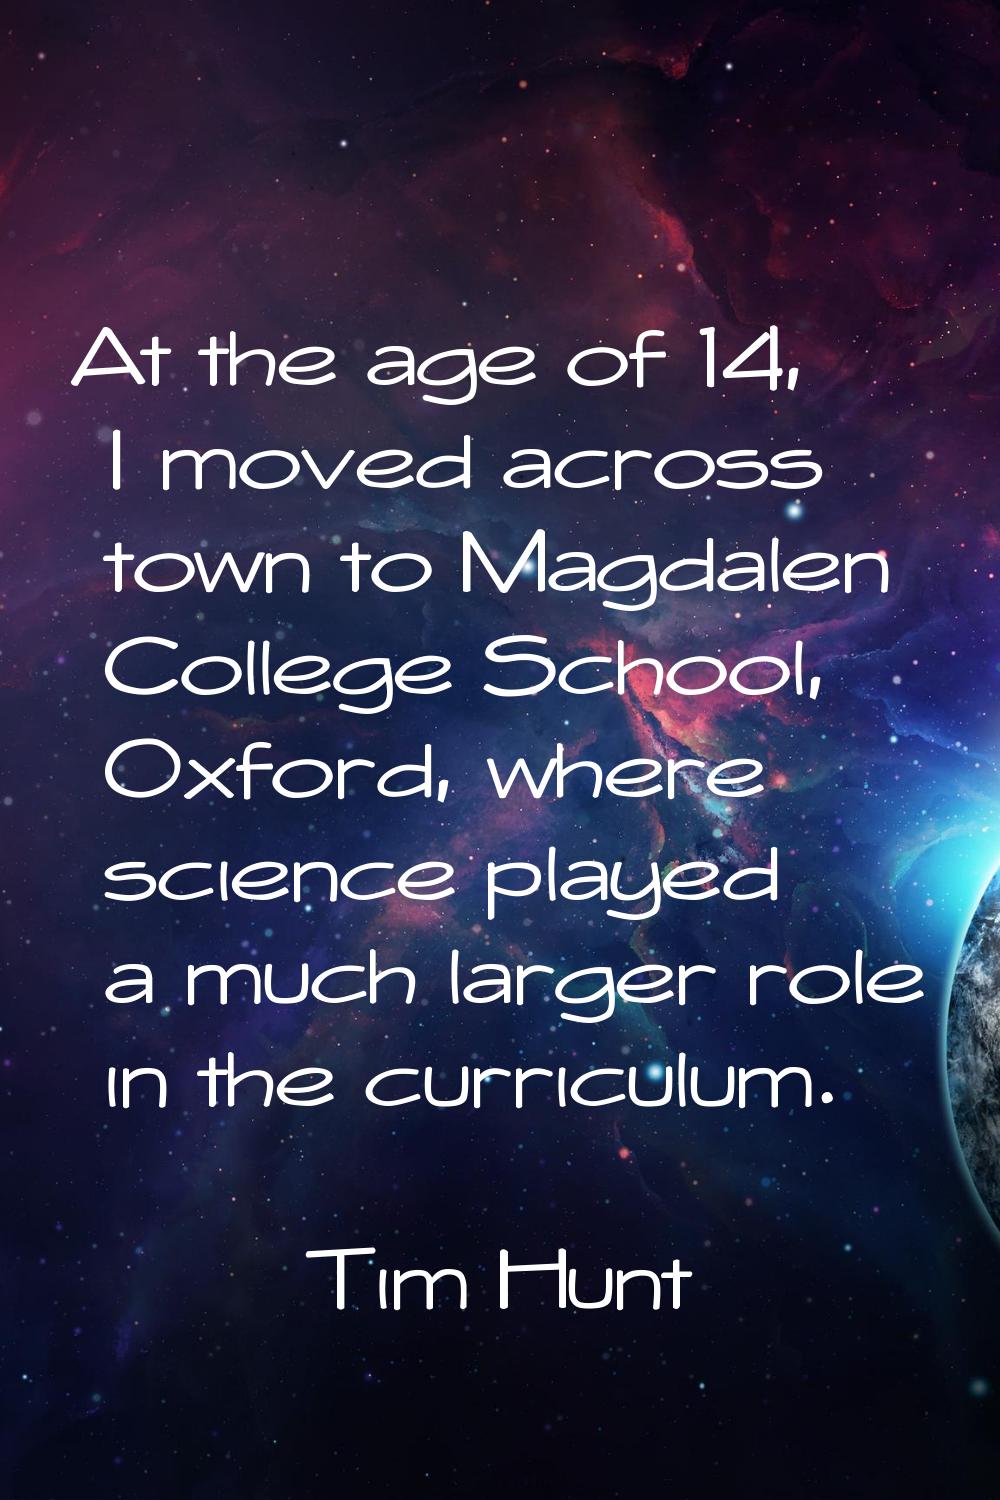 At the age of 14, I moved across town to Magdalen College School, Oxford, where science played a mu